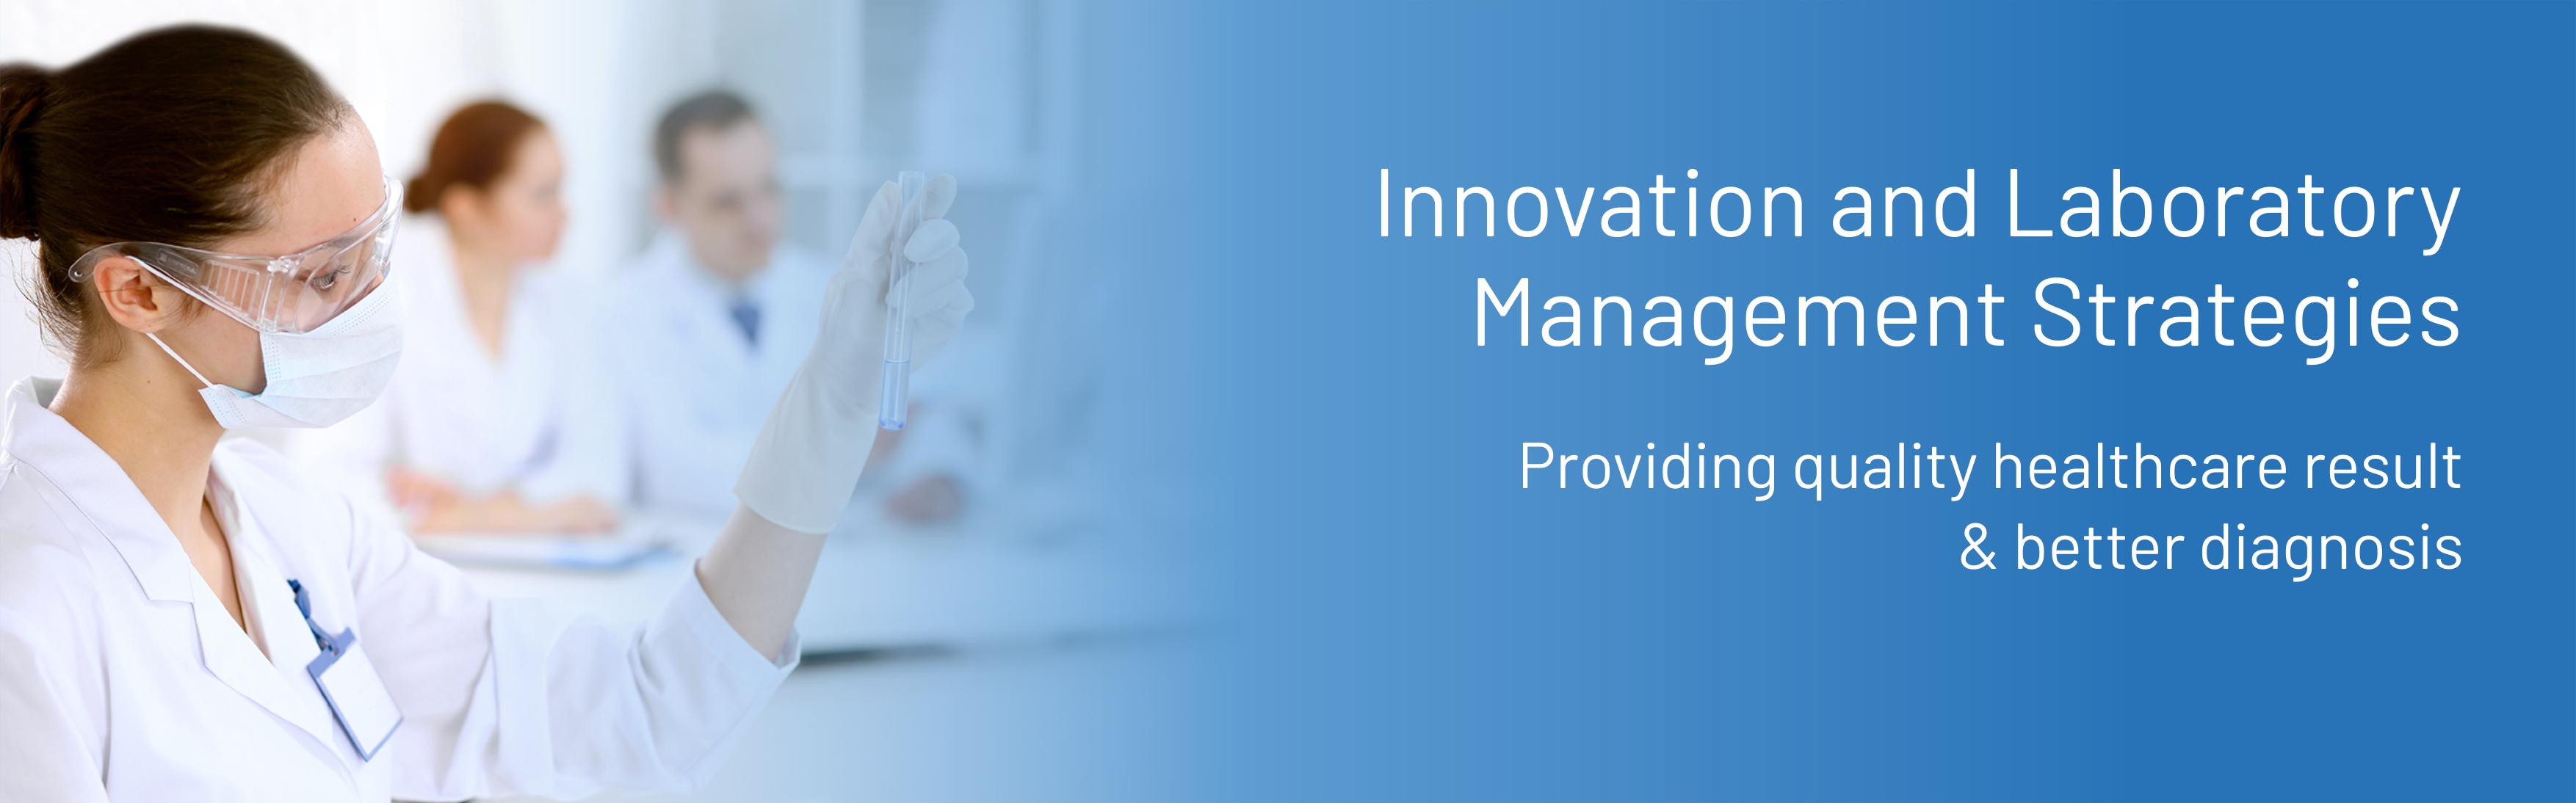 Innovation and Laboratory Management Strategies